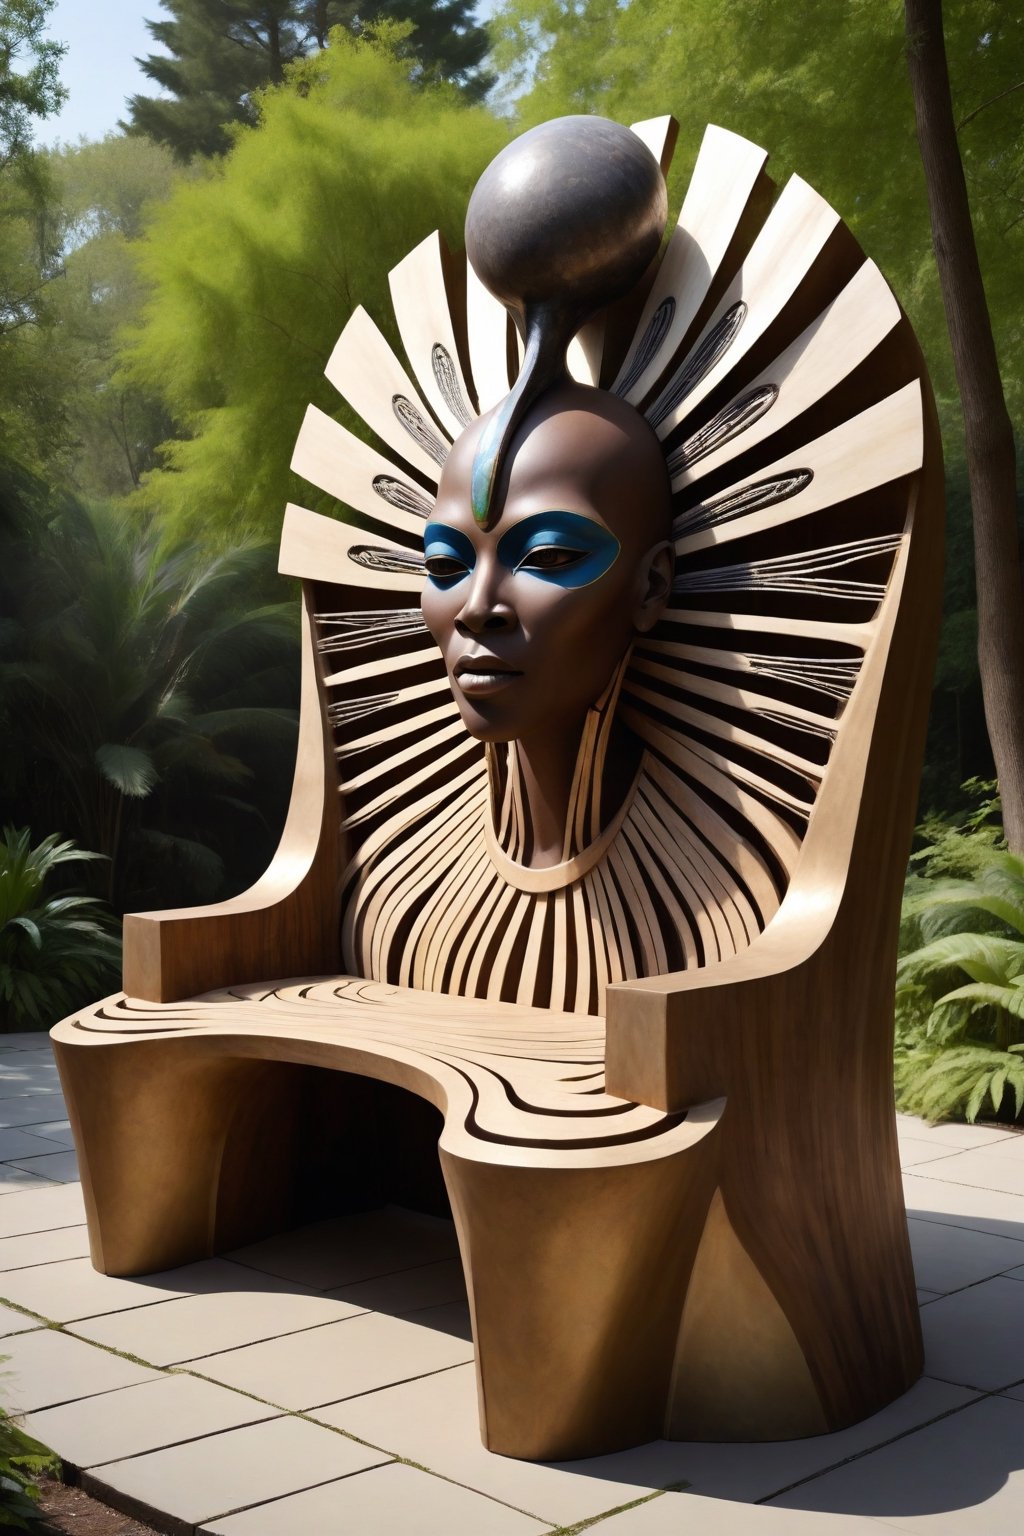 (masterpiece, best quality, high quality), fine art image design of an outdoors bench made of natural materials in alien shaped forms highly inspired by afro-futurism for a King and Wangechi Mutu and Sun Ra, must be extremely original and professional design exposed in the best artificial focused installation with perfect realistic shape depth textures and highly intricate as in fine art